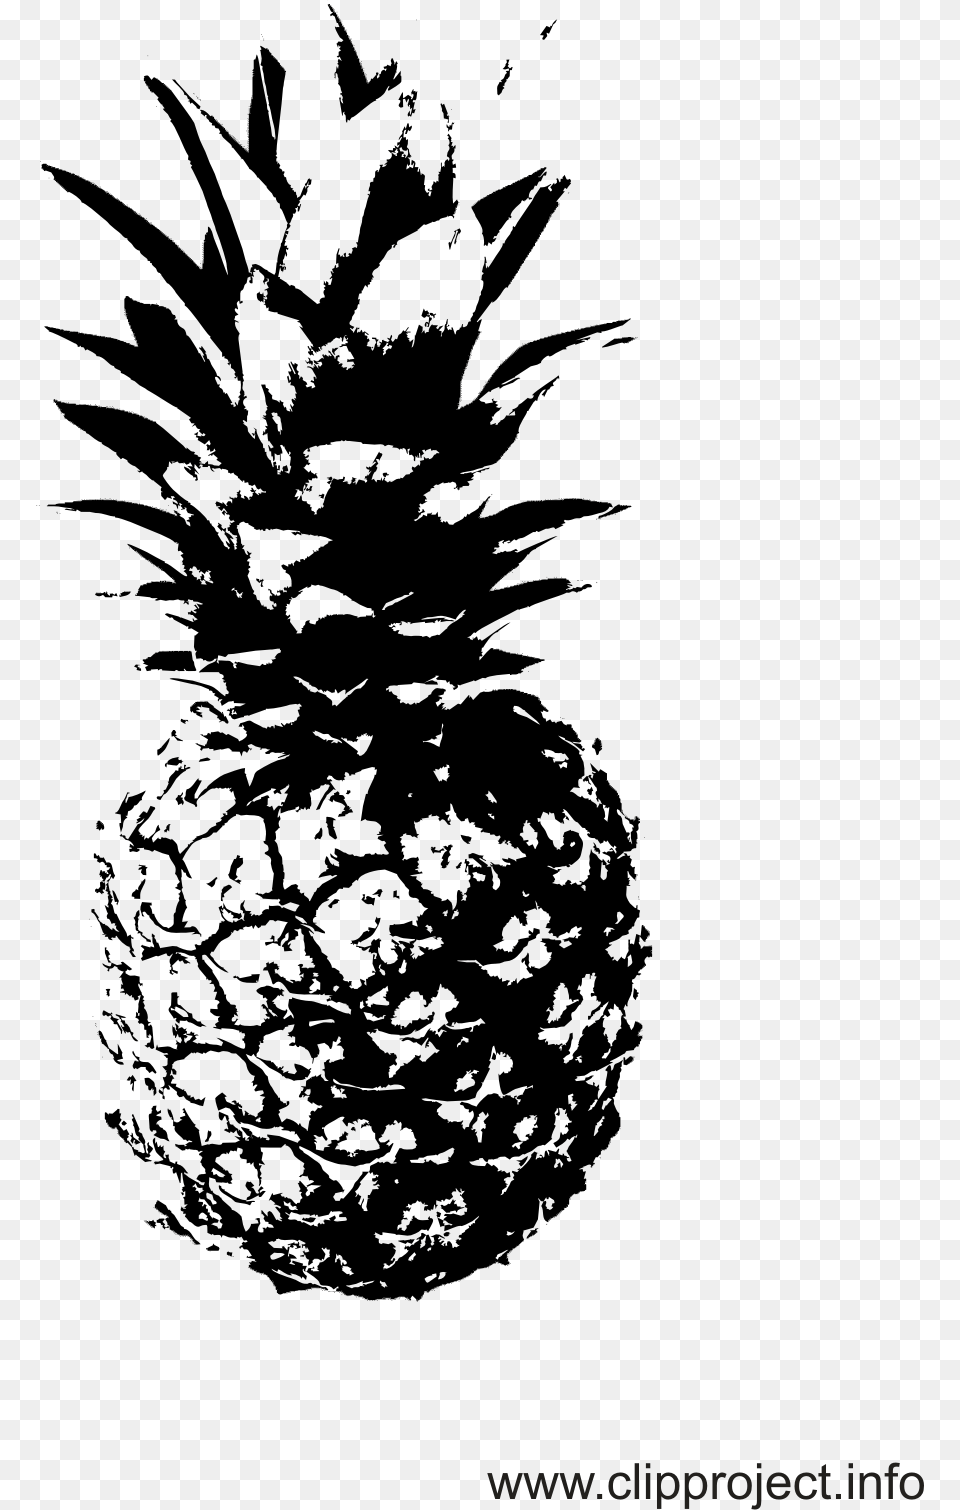 Pineapple Clipart Classy Schwarz Wei Bilder Ananas, Produce, Plant, Food, Fruit Free Png